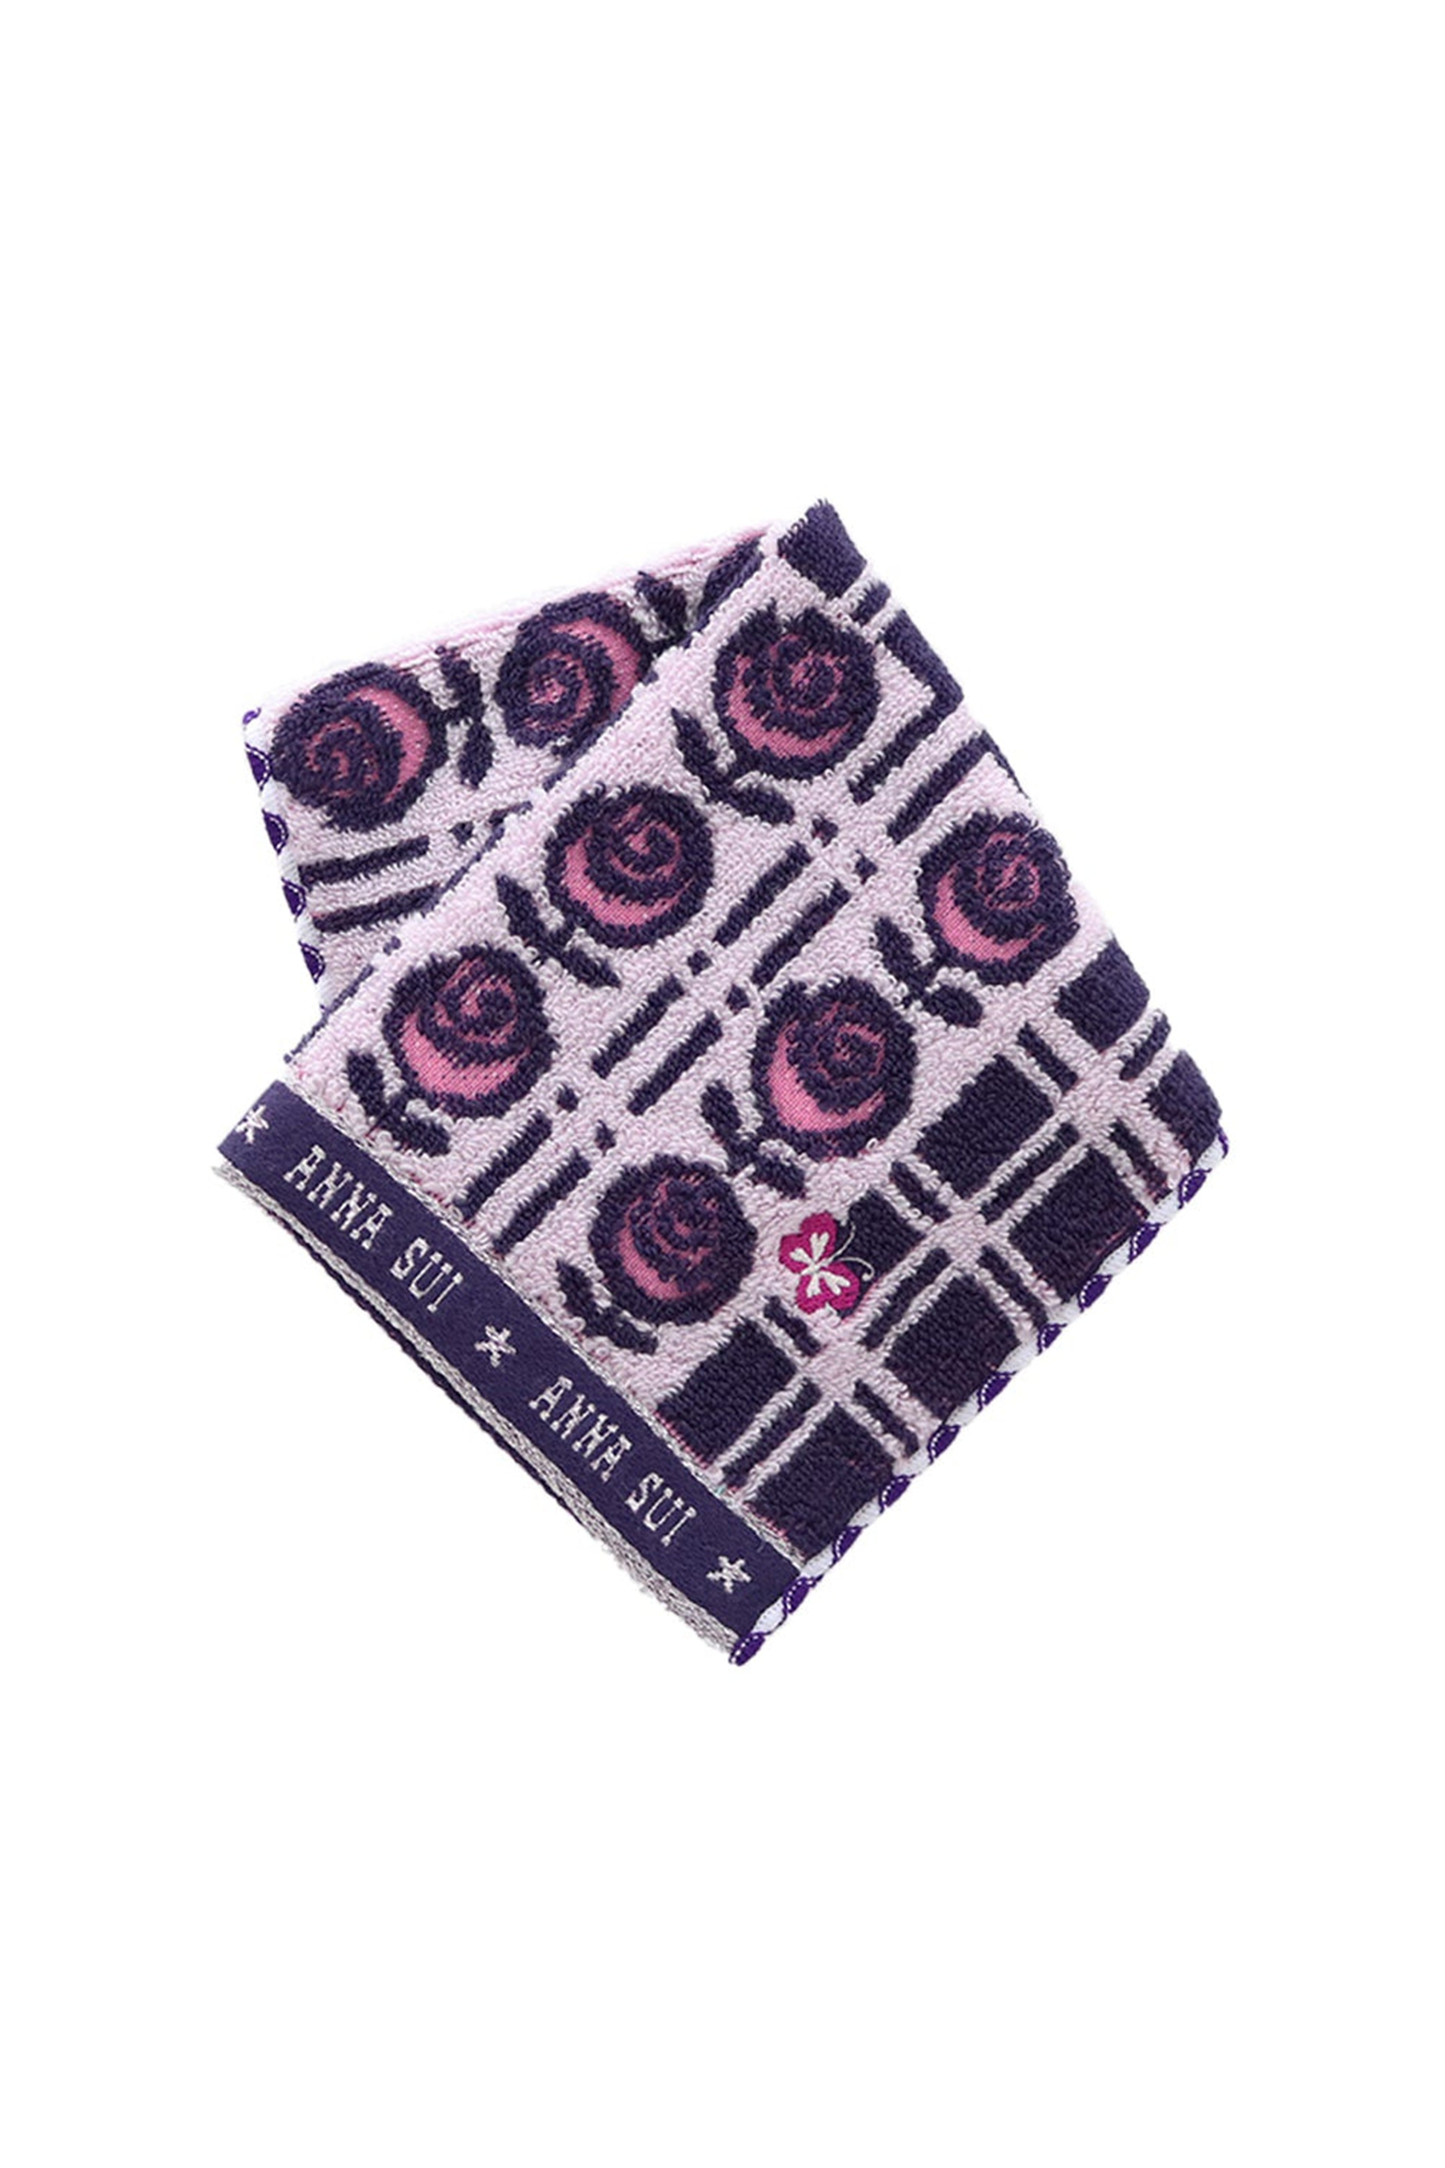  Washcloth, red roses on white, black border at bottom white Anna Sui's signature, red butterfly